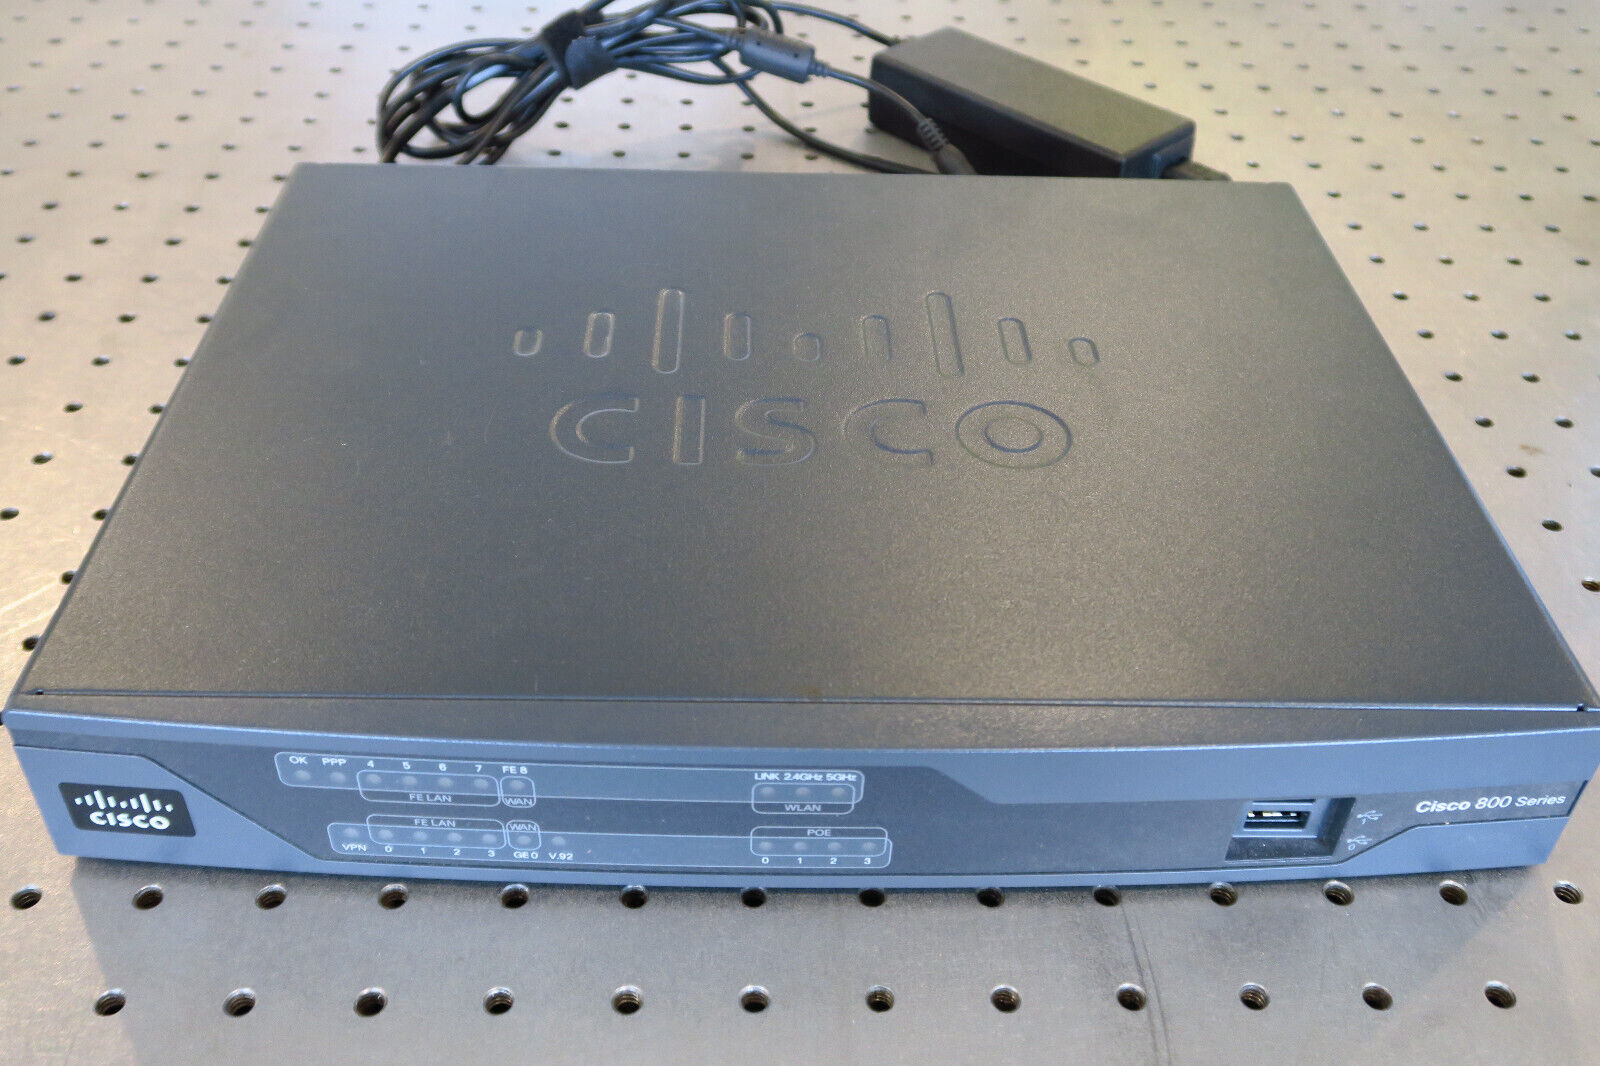 Cisco C891-K9 V02 890 Series 4 Port POE 8 Port Router with power supply